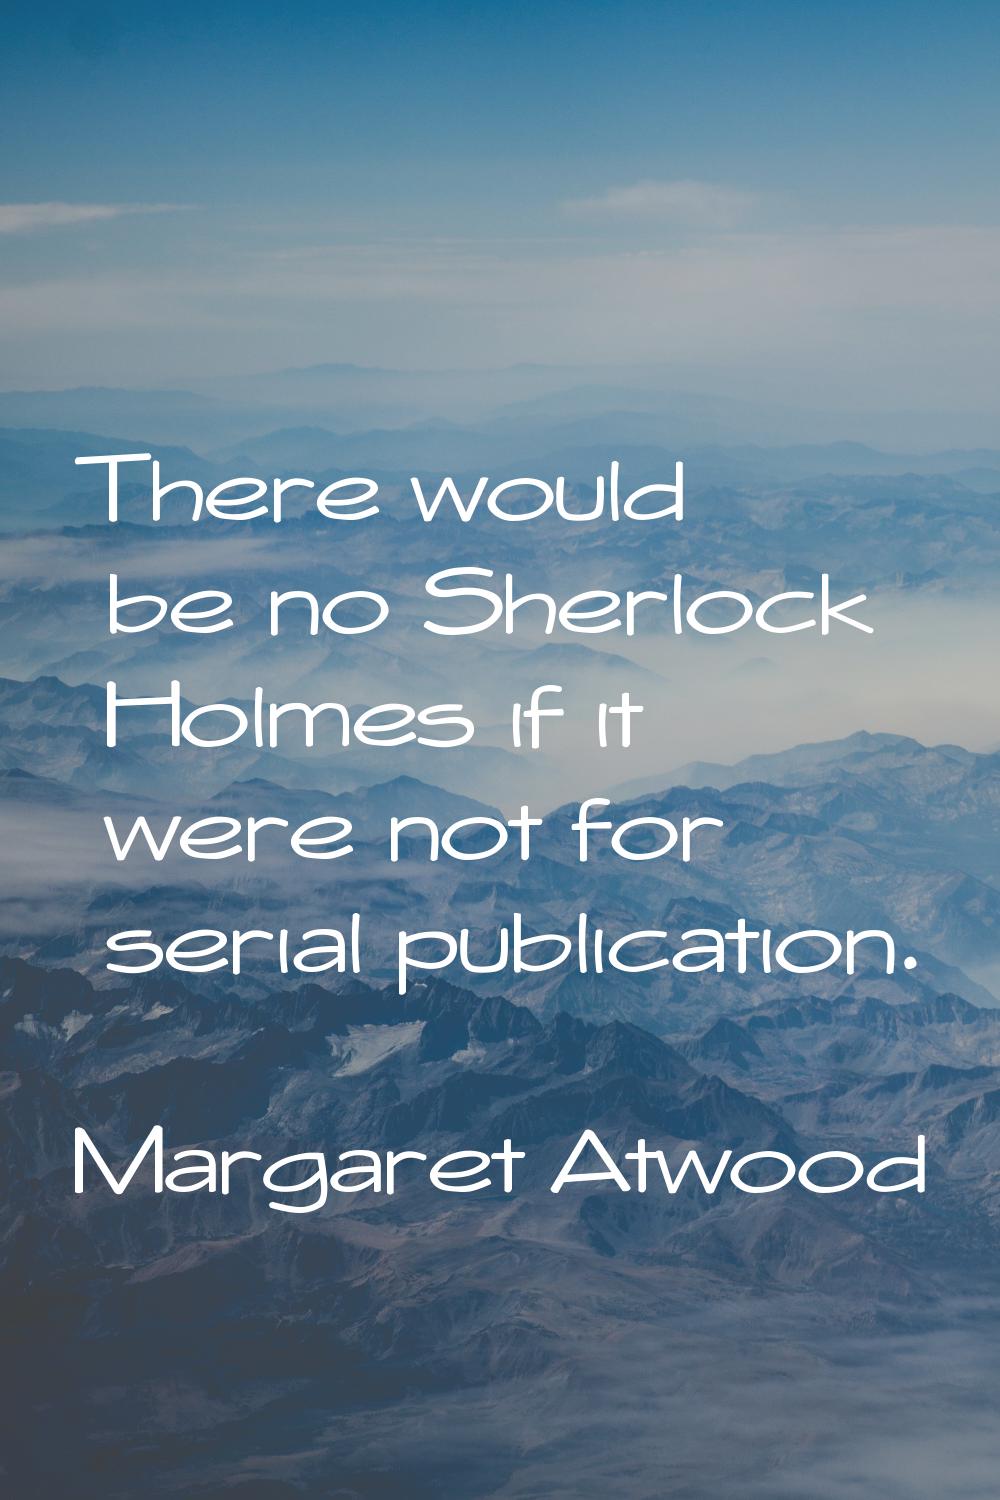 There would be no Sherlock Holmes if it were not for serial publication.